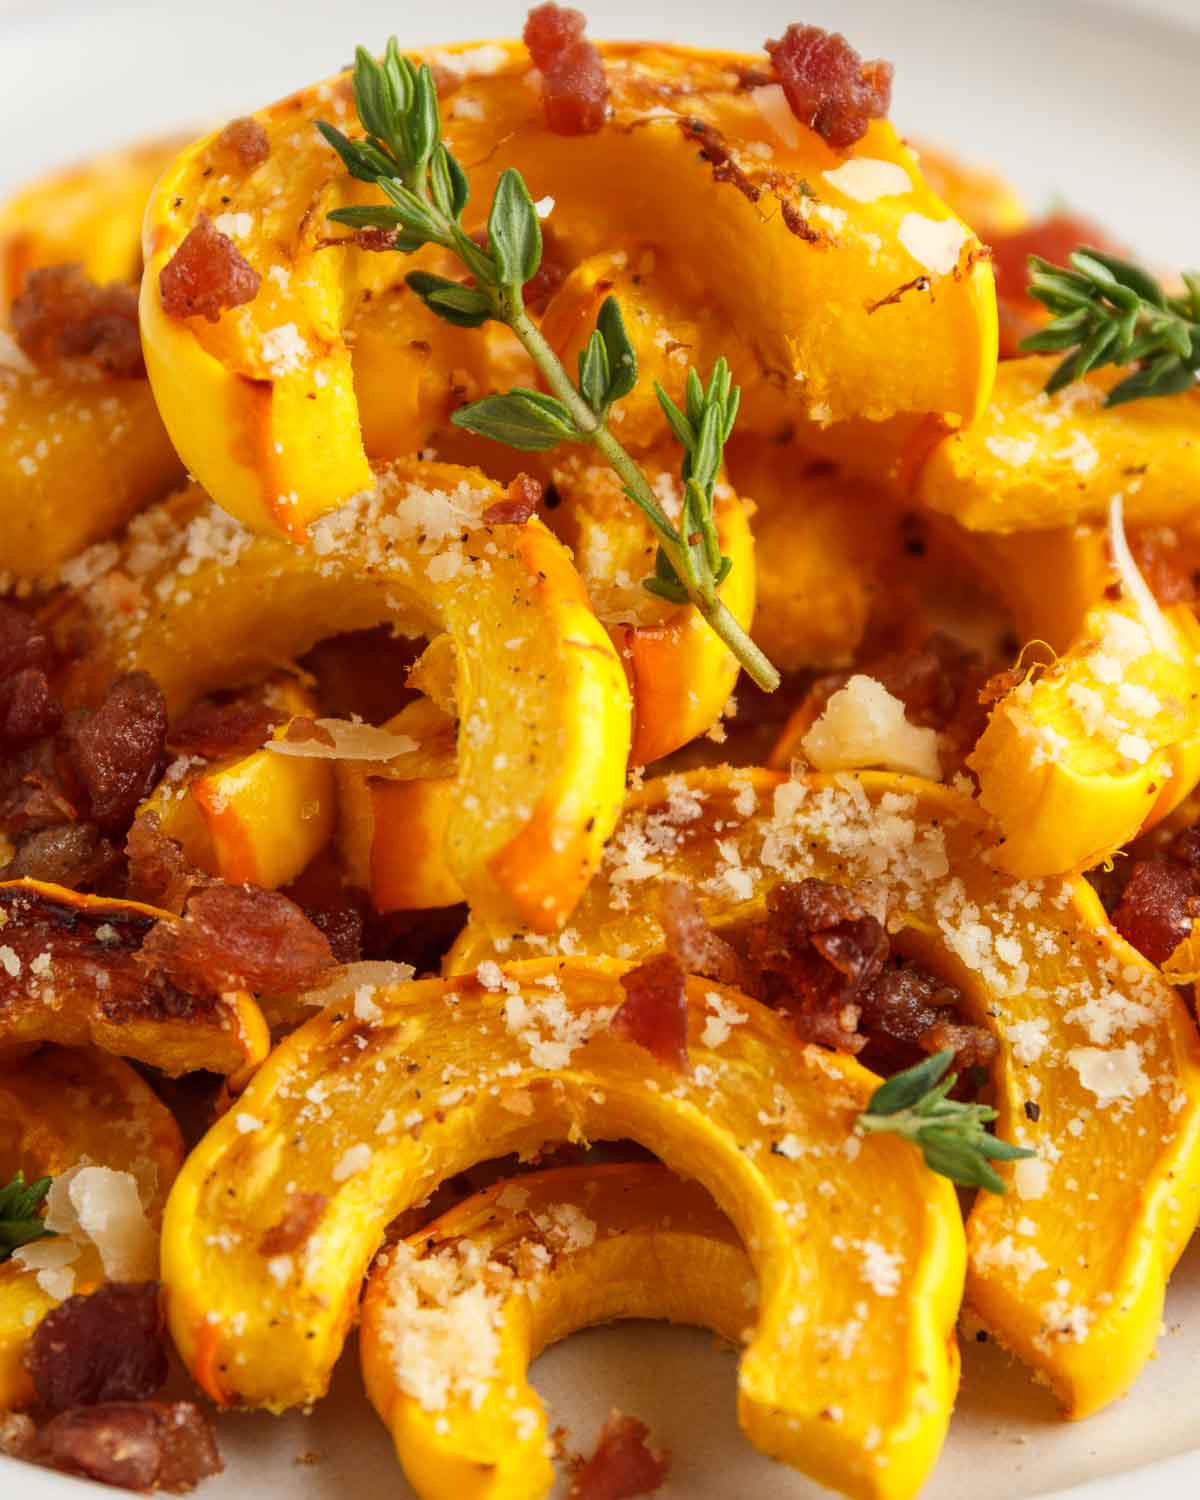 A plate of roasted parmesan delicata squash with thyme and bacon.